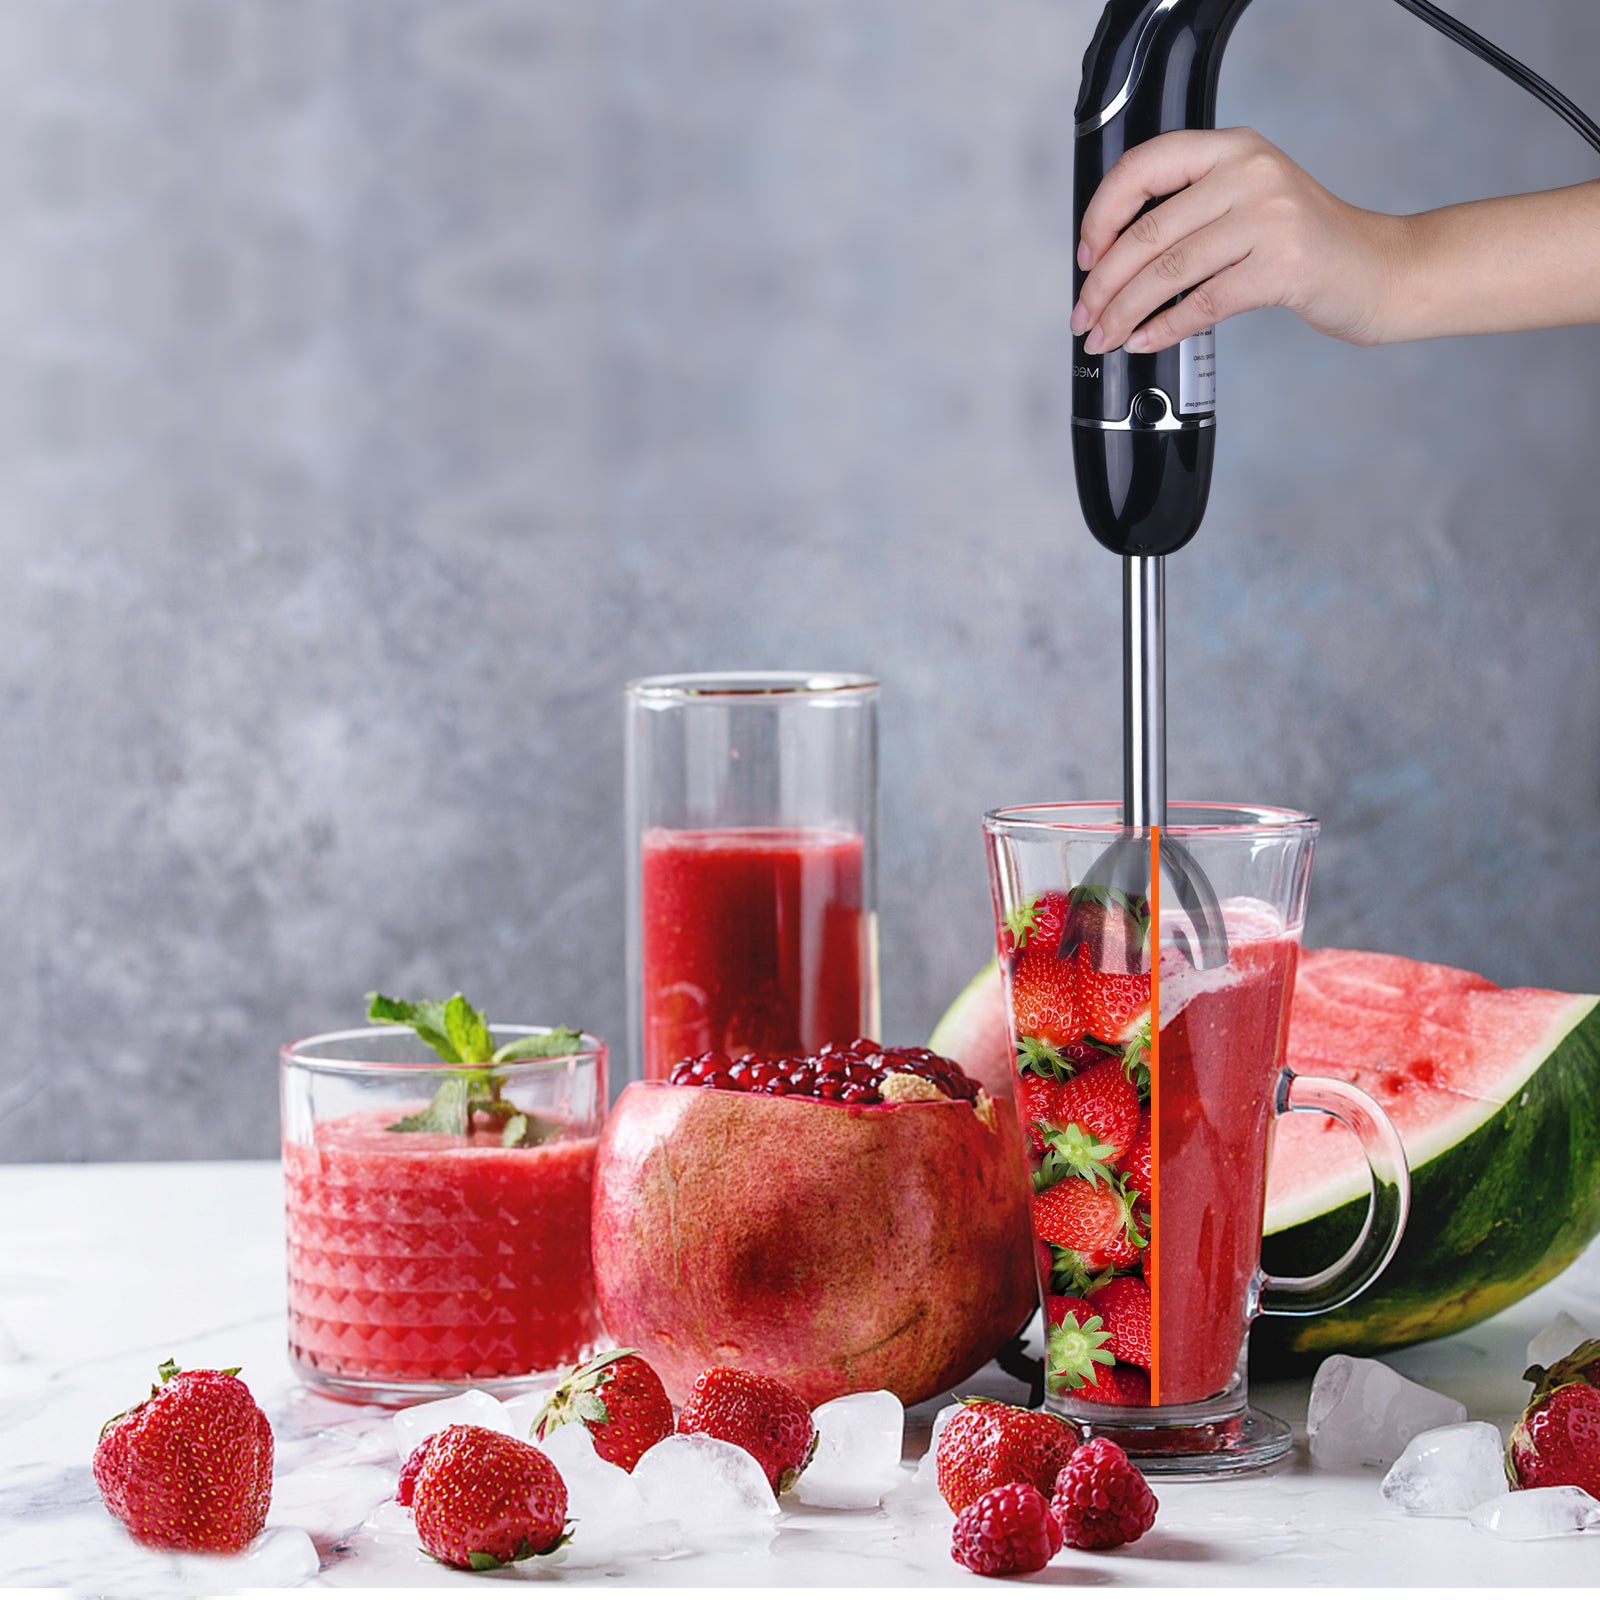 MEGAWISE 3-in-1 Immersion Hand Blender: Powerful 800W, 12-Speed Stick Blender with Sturdy Titanium-Plated Stainless-Steel Blades